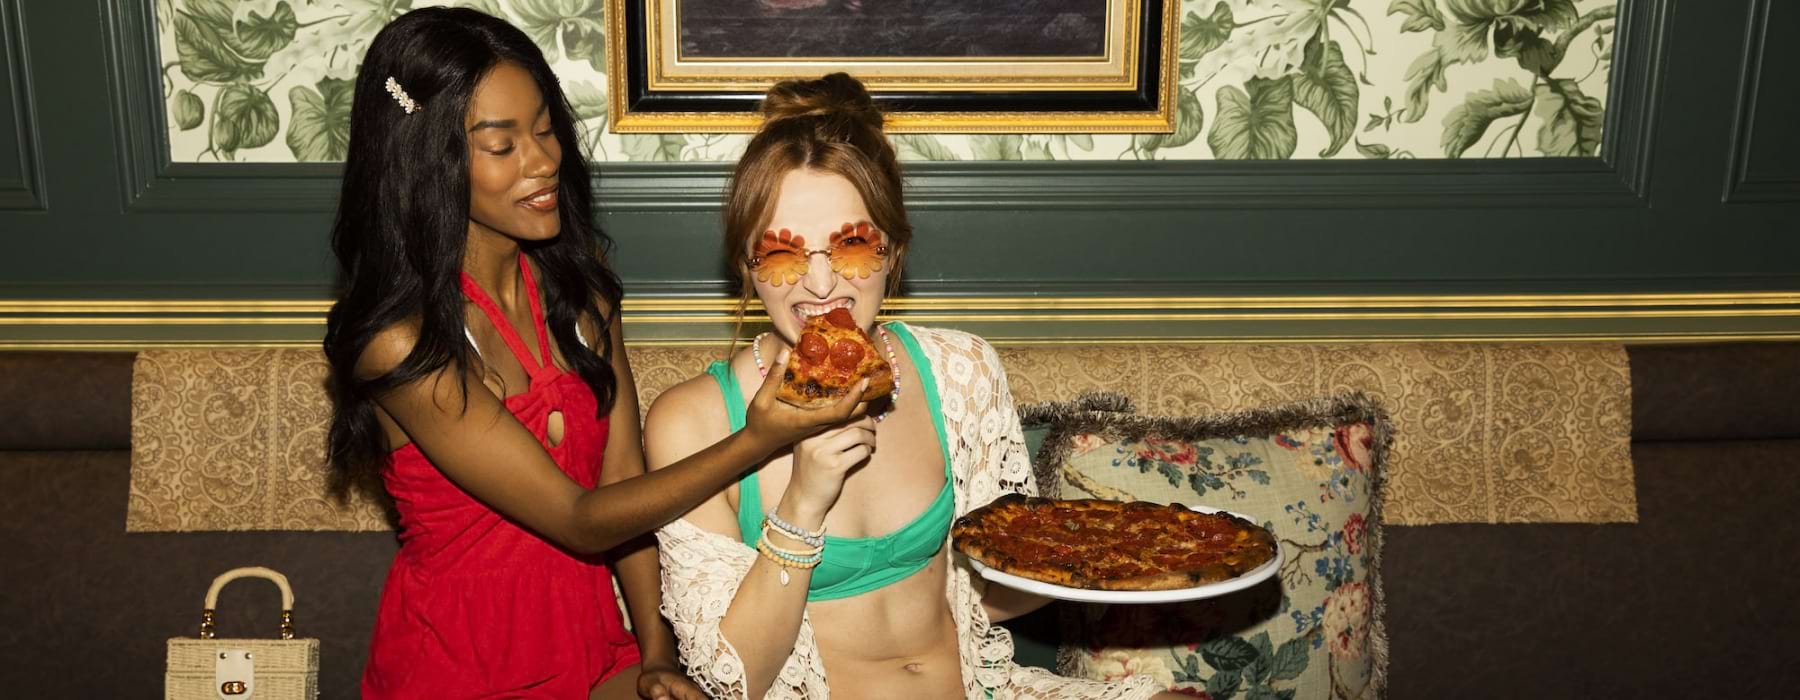 Two women eating pizza